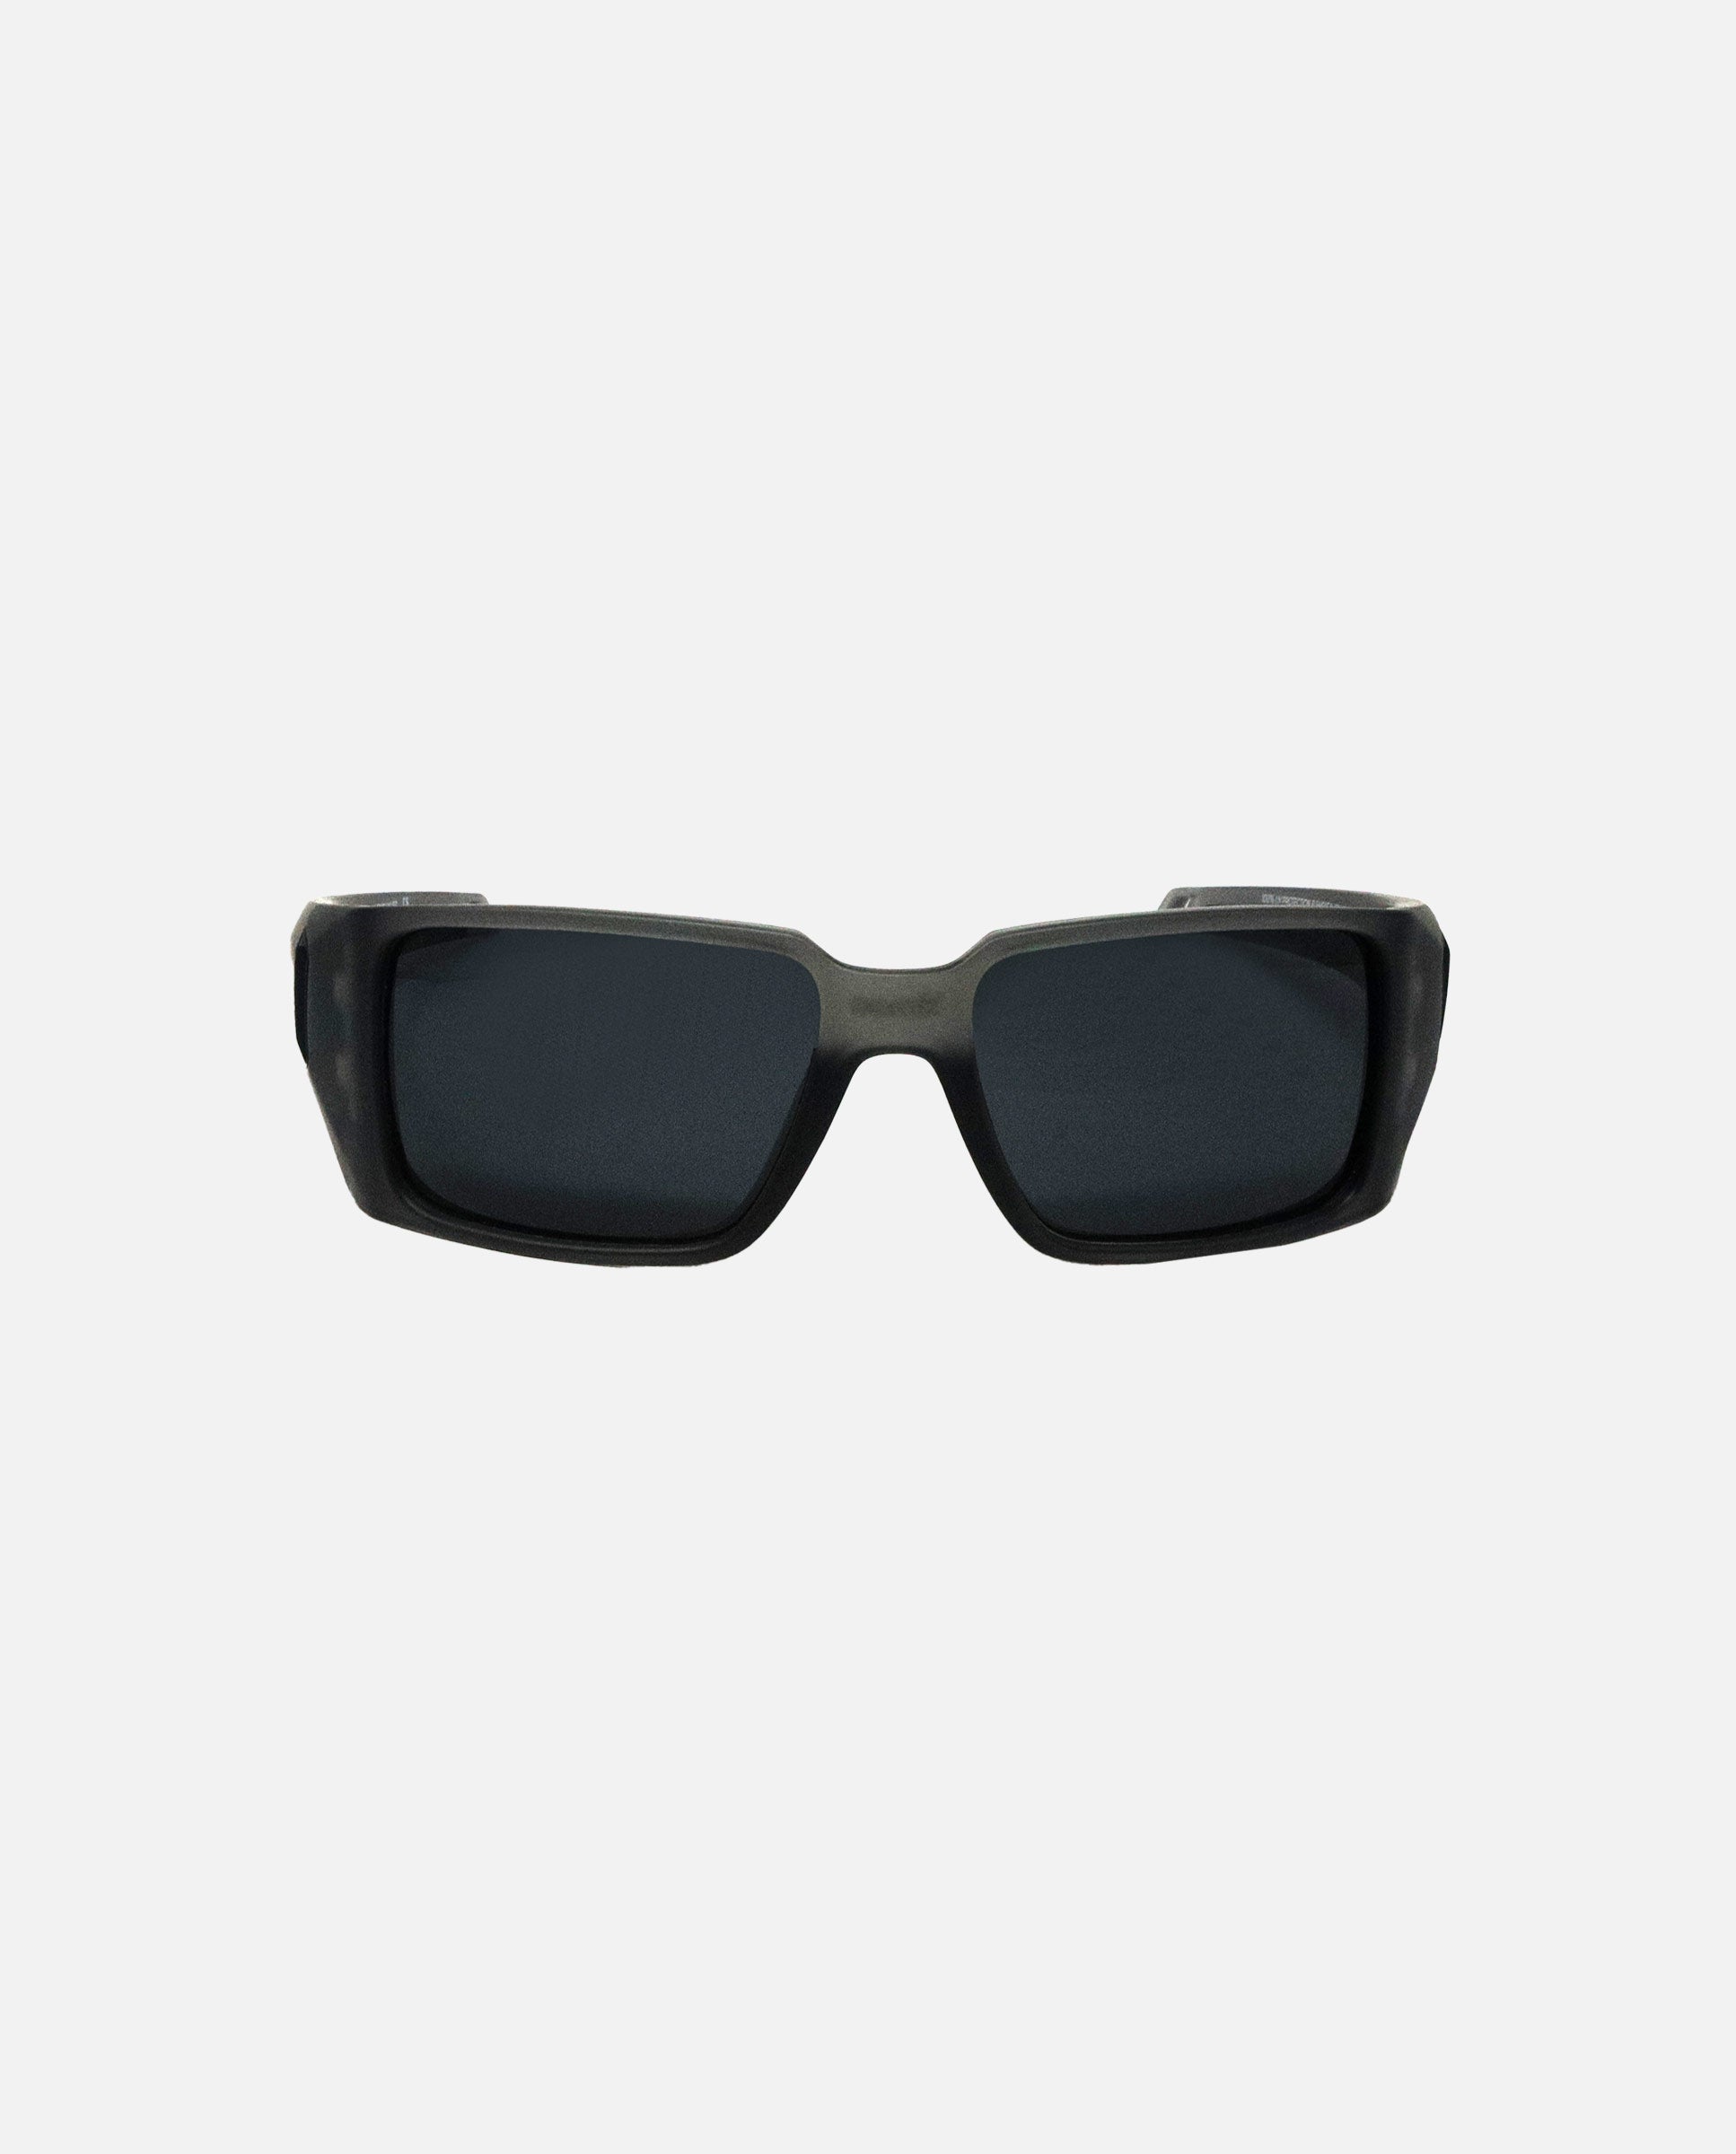 Sunglasses Element 14 Recycled